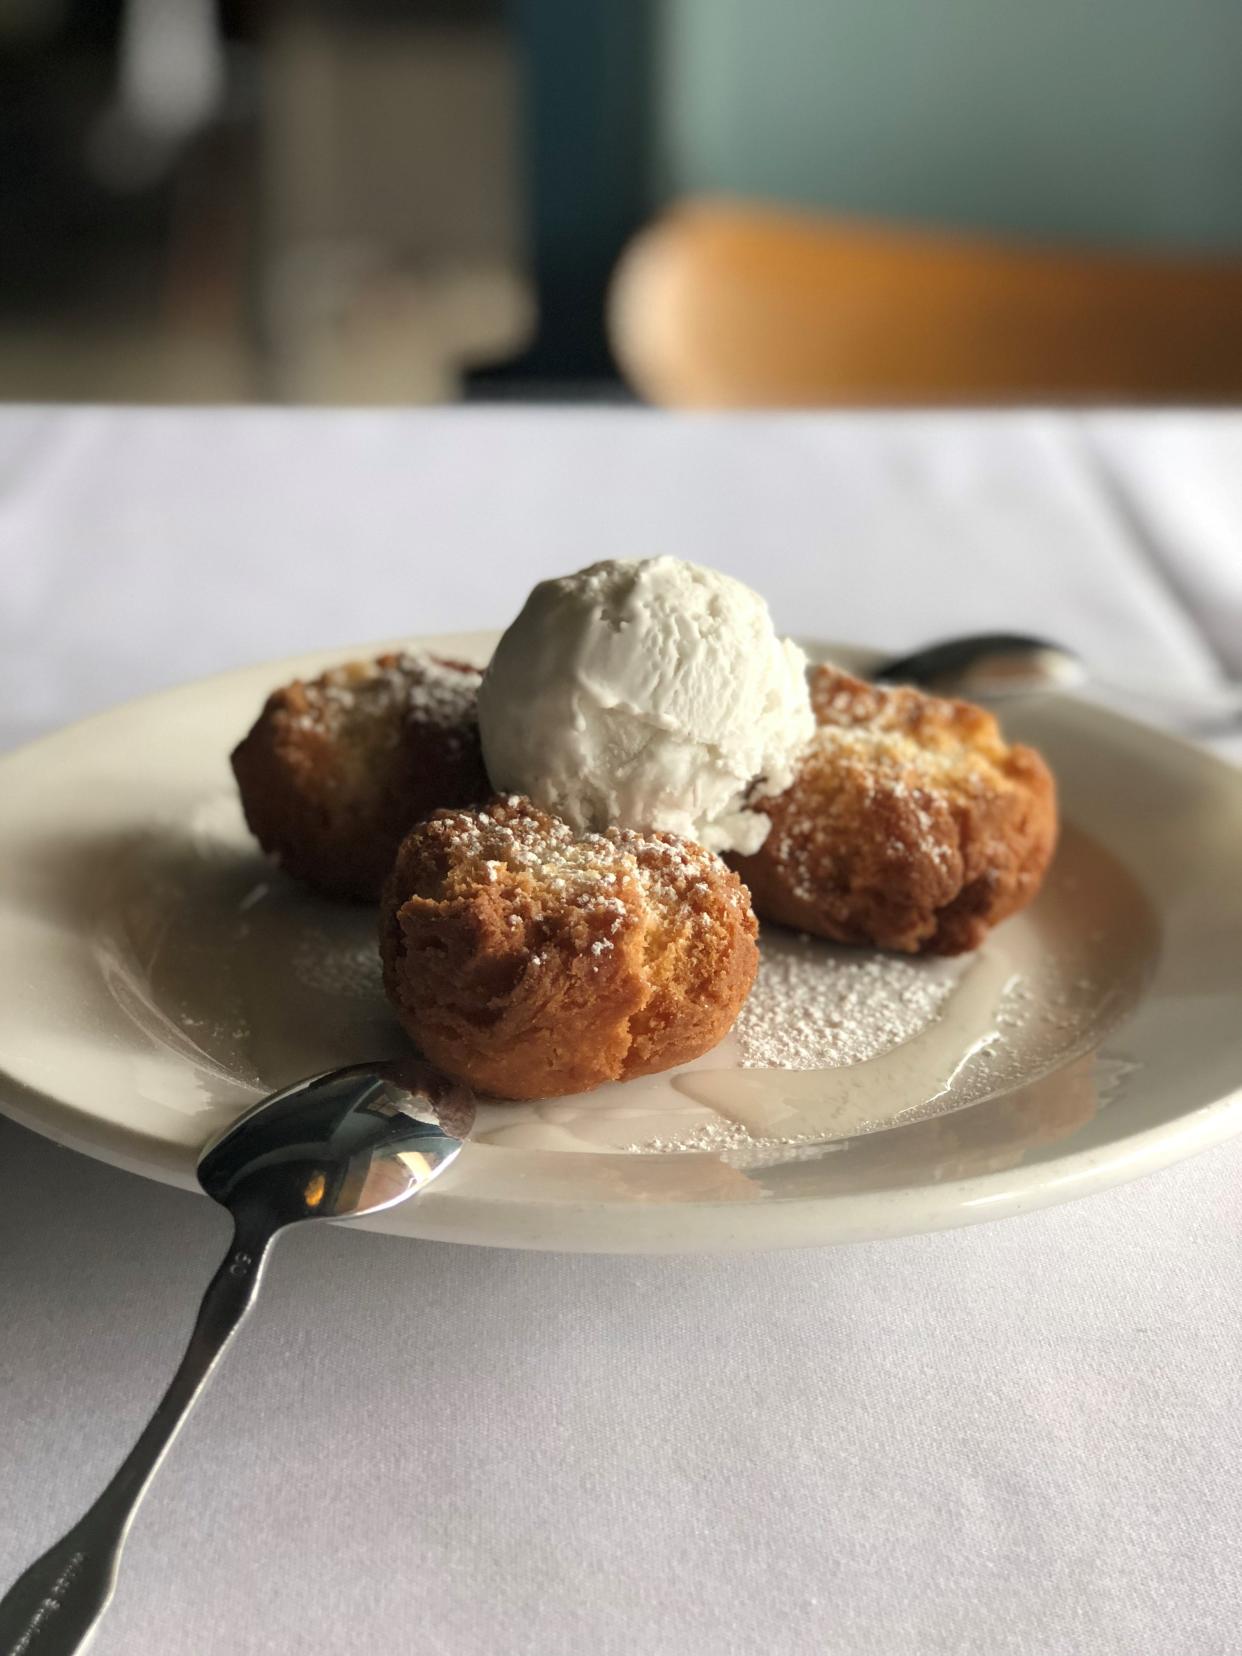 The ginger doughnuts with coconut sorbet are the perfect ending to a dinner at Tsunami.